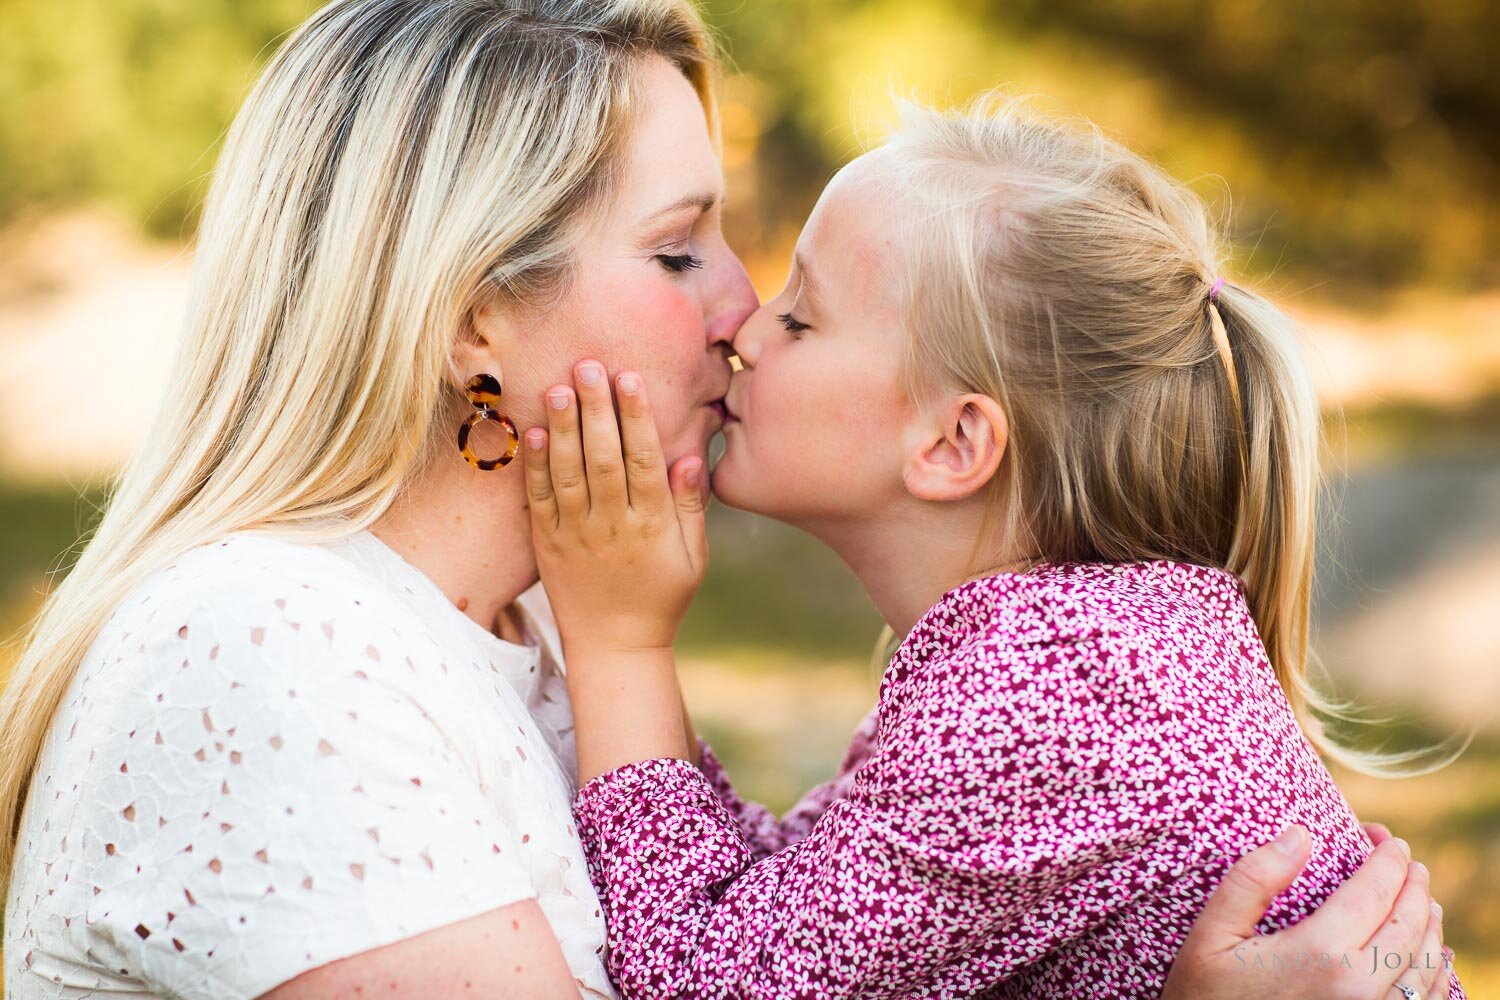 mom-and-daughter-kissing-by-stockholm-family-photographer-sandra-jolly.jpg